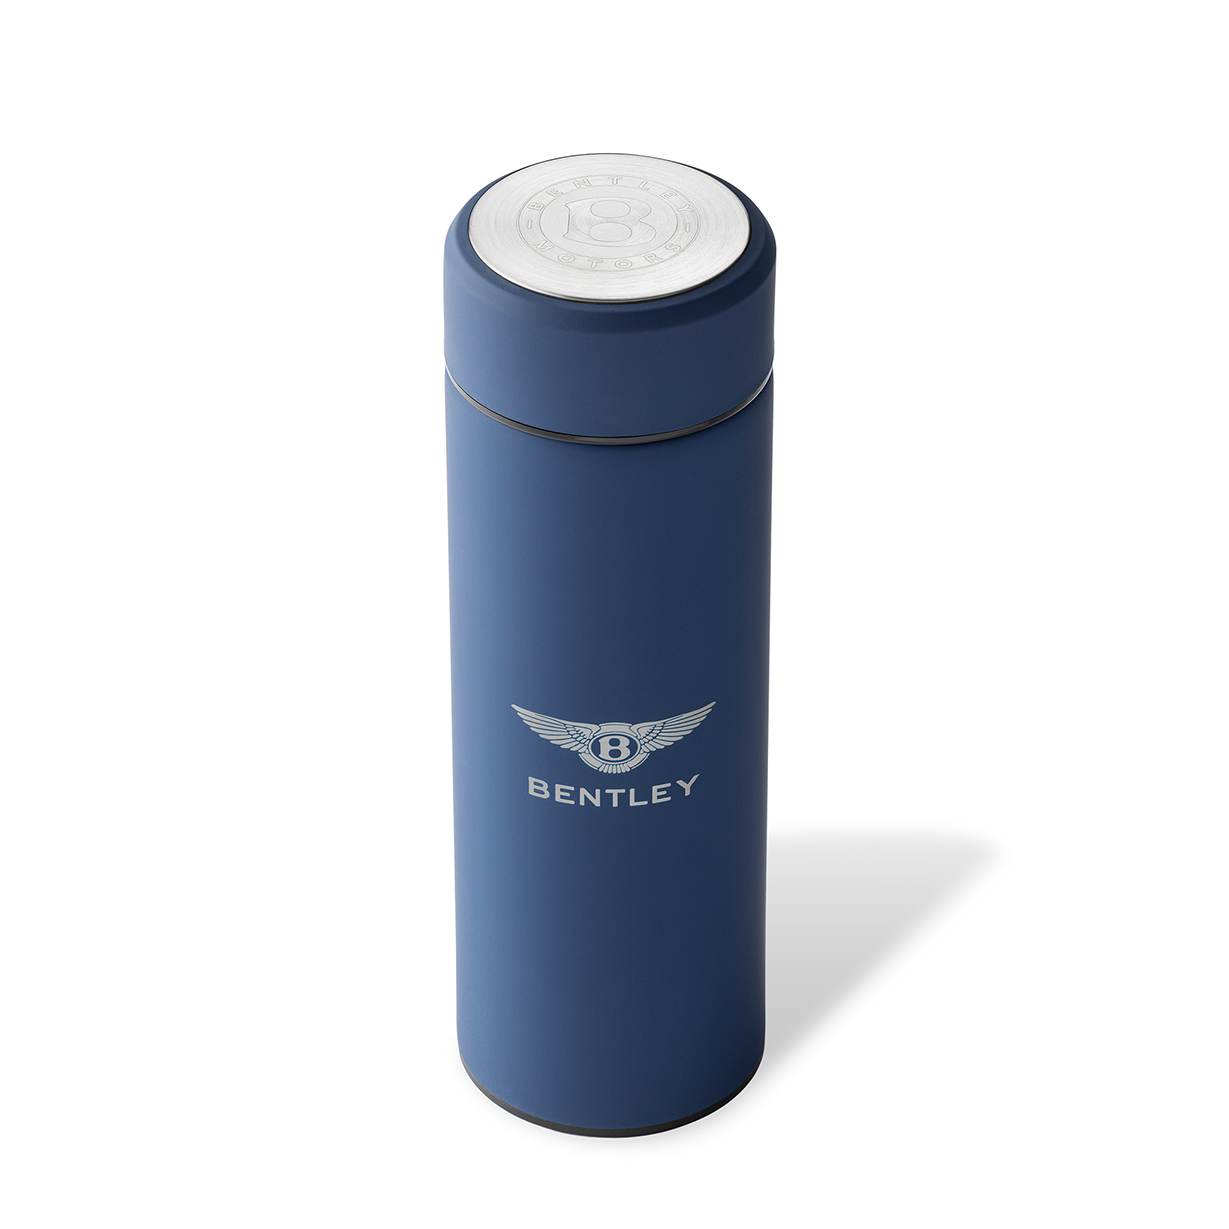 2021 Bentley Collection - Travel Flask Blue